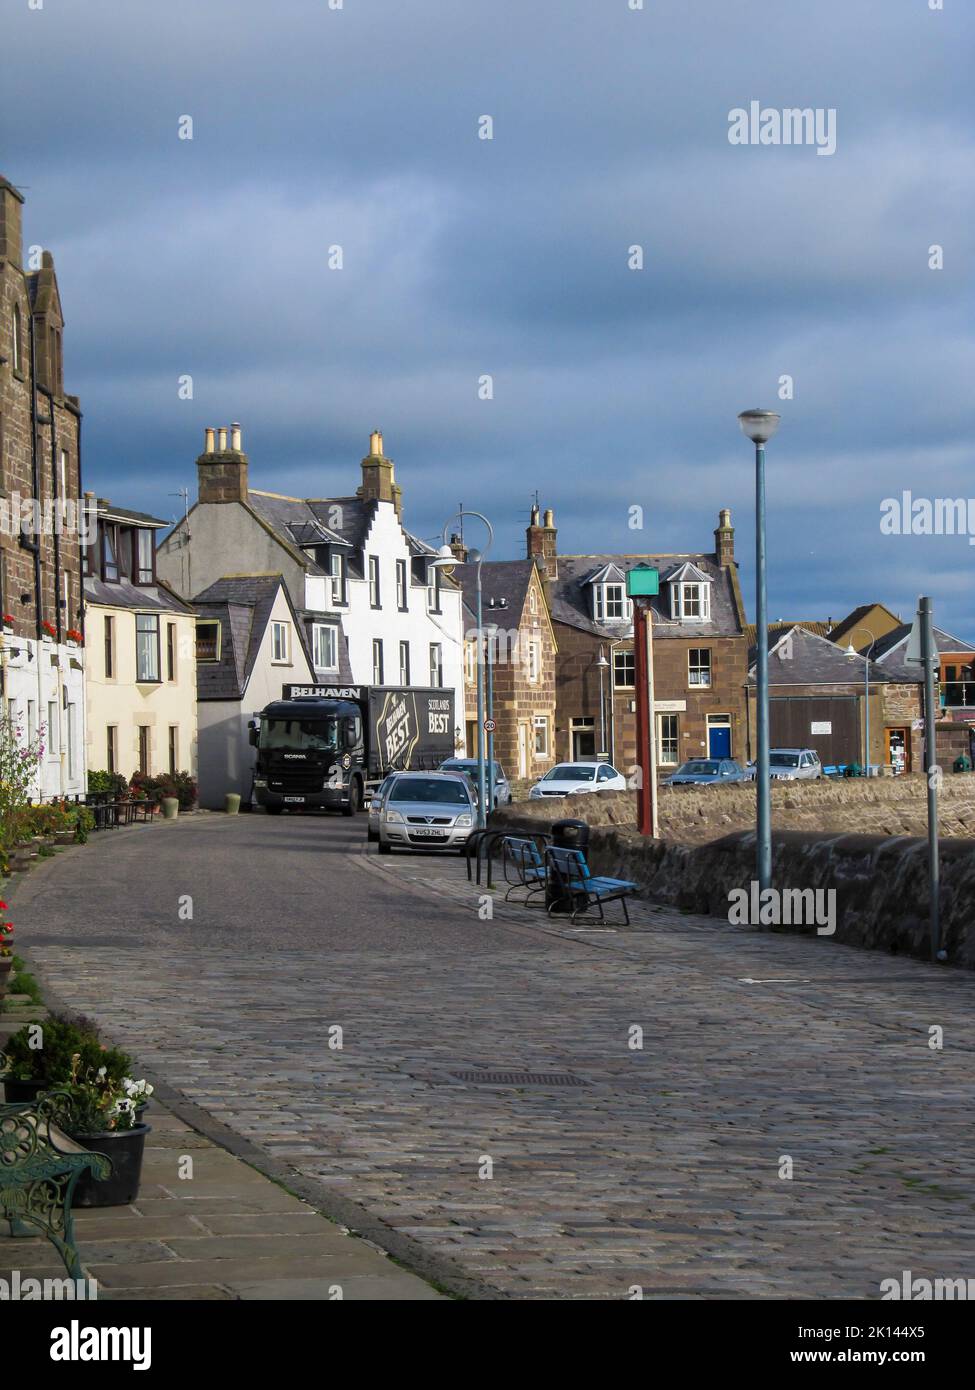 Cobblestone road in the morning, at the harbor of the small Scottish fishing village of Stonehaven, with ominous steel blue clouds in the background Stock Photo